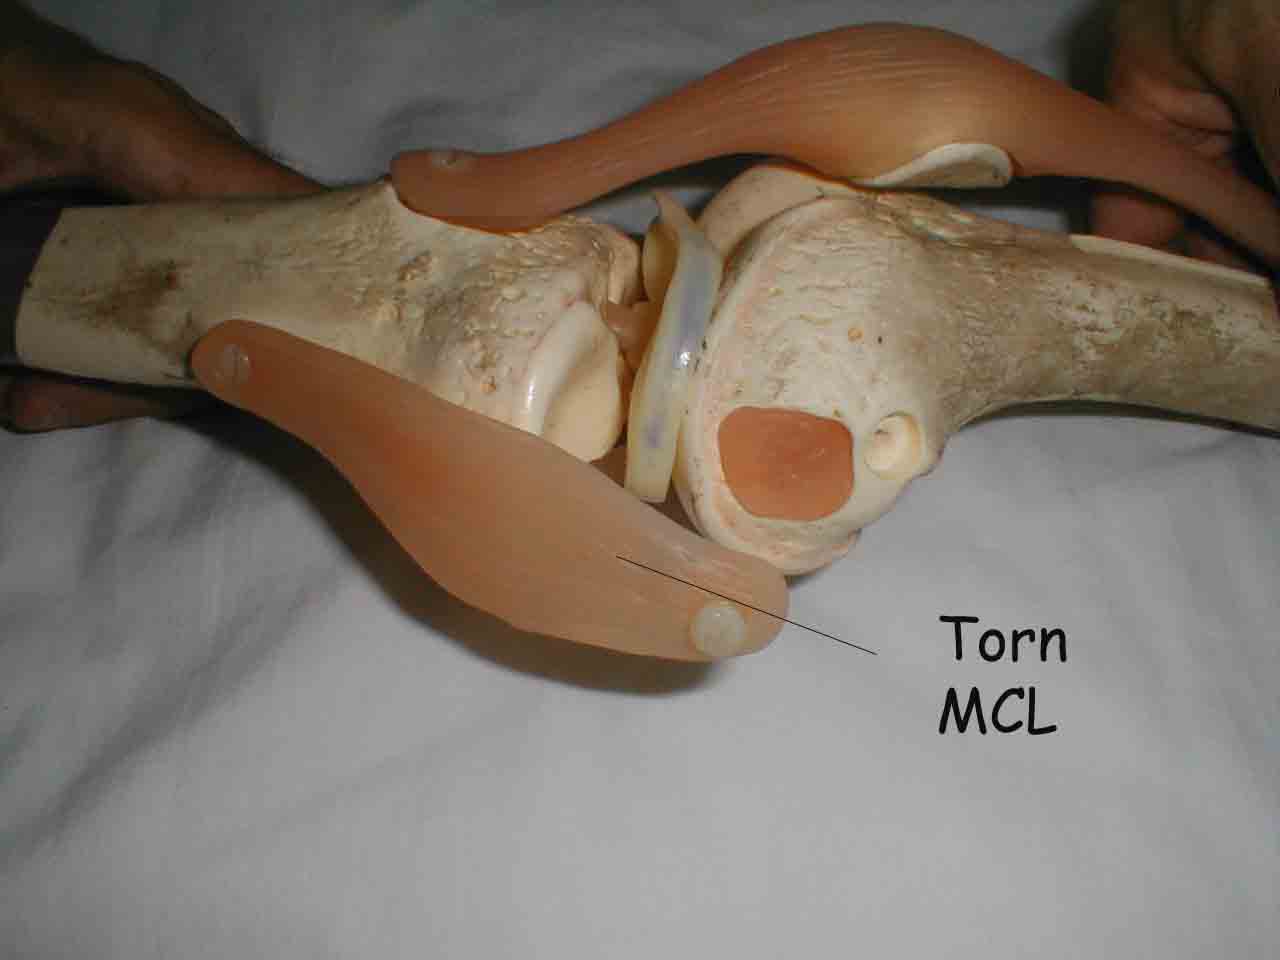 Simmulated Torn MCL